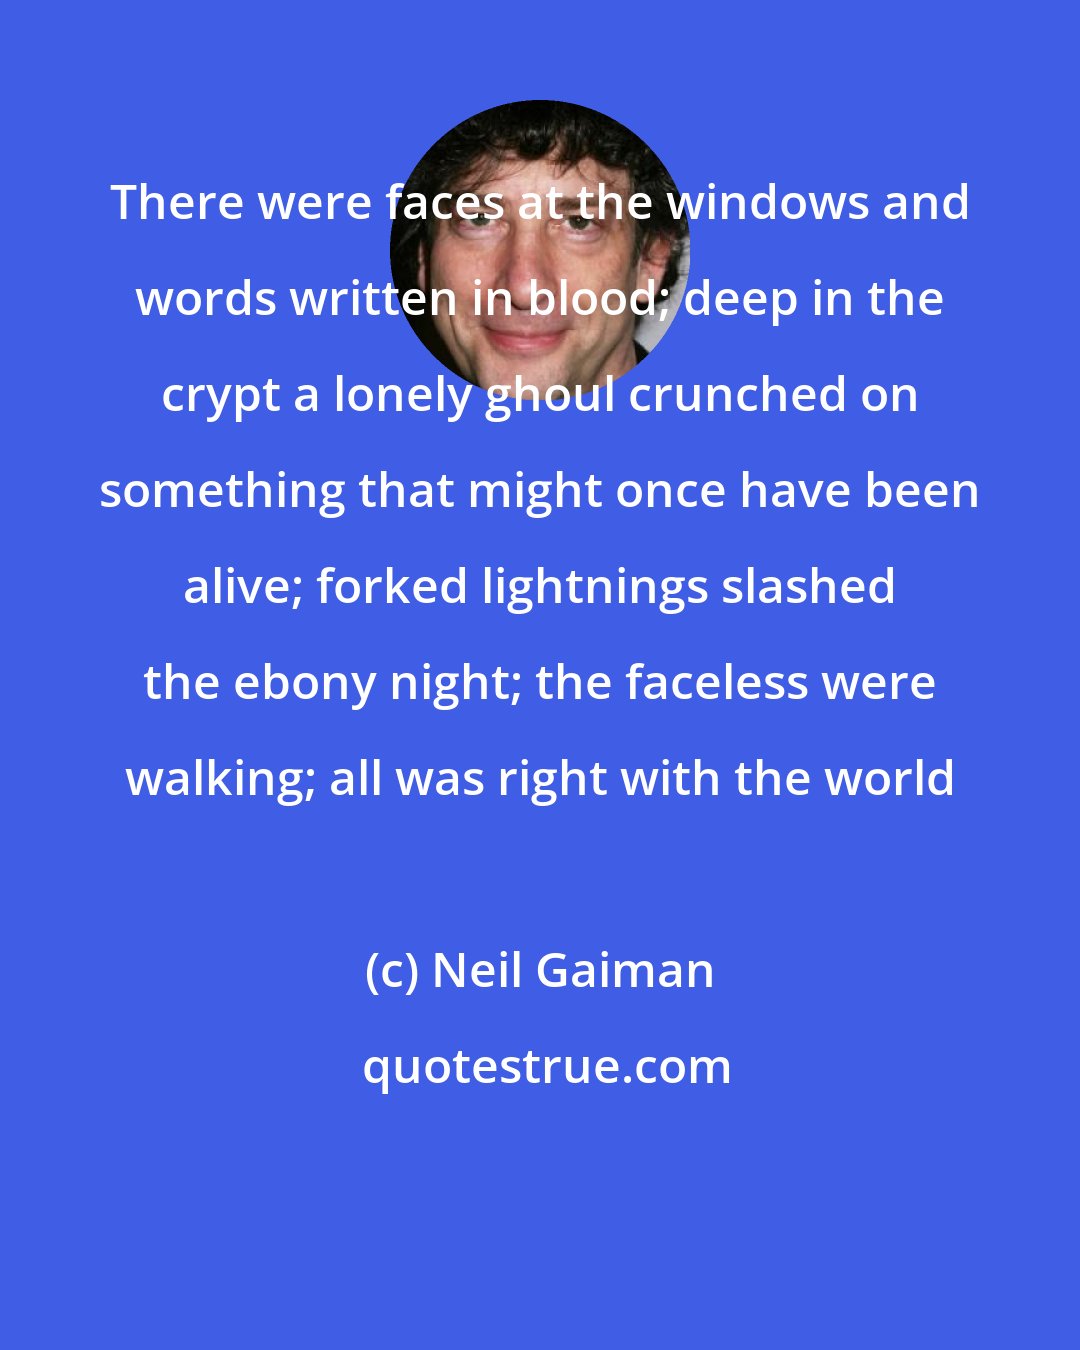 Neil Gaiman: There were faces at the windows and words written in blood; deep in the crypt a lonely ghoul crunched on something that might once have been alive; forked lightnings slashed the ebony night; the faceless were walking; all was right with the world